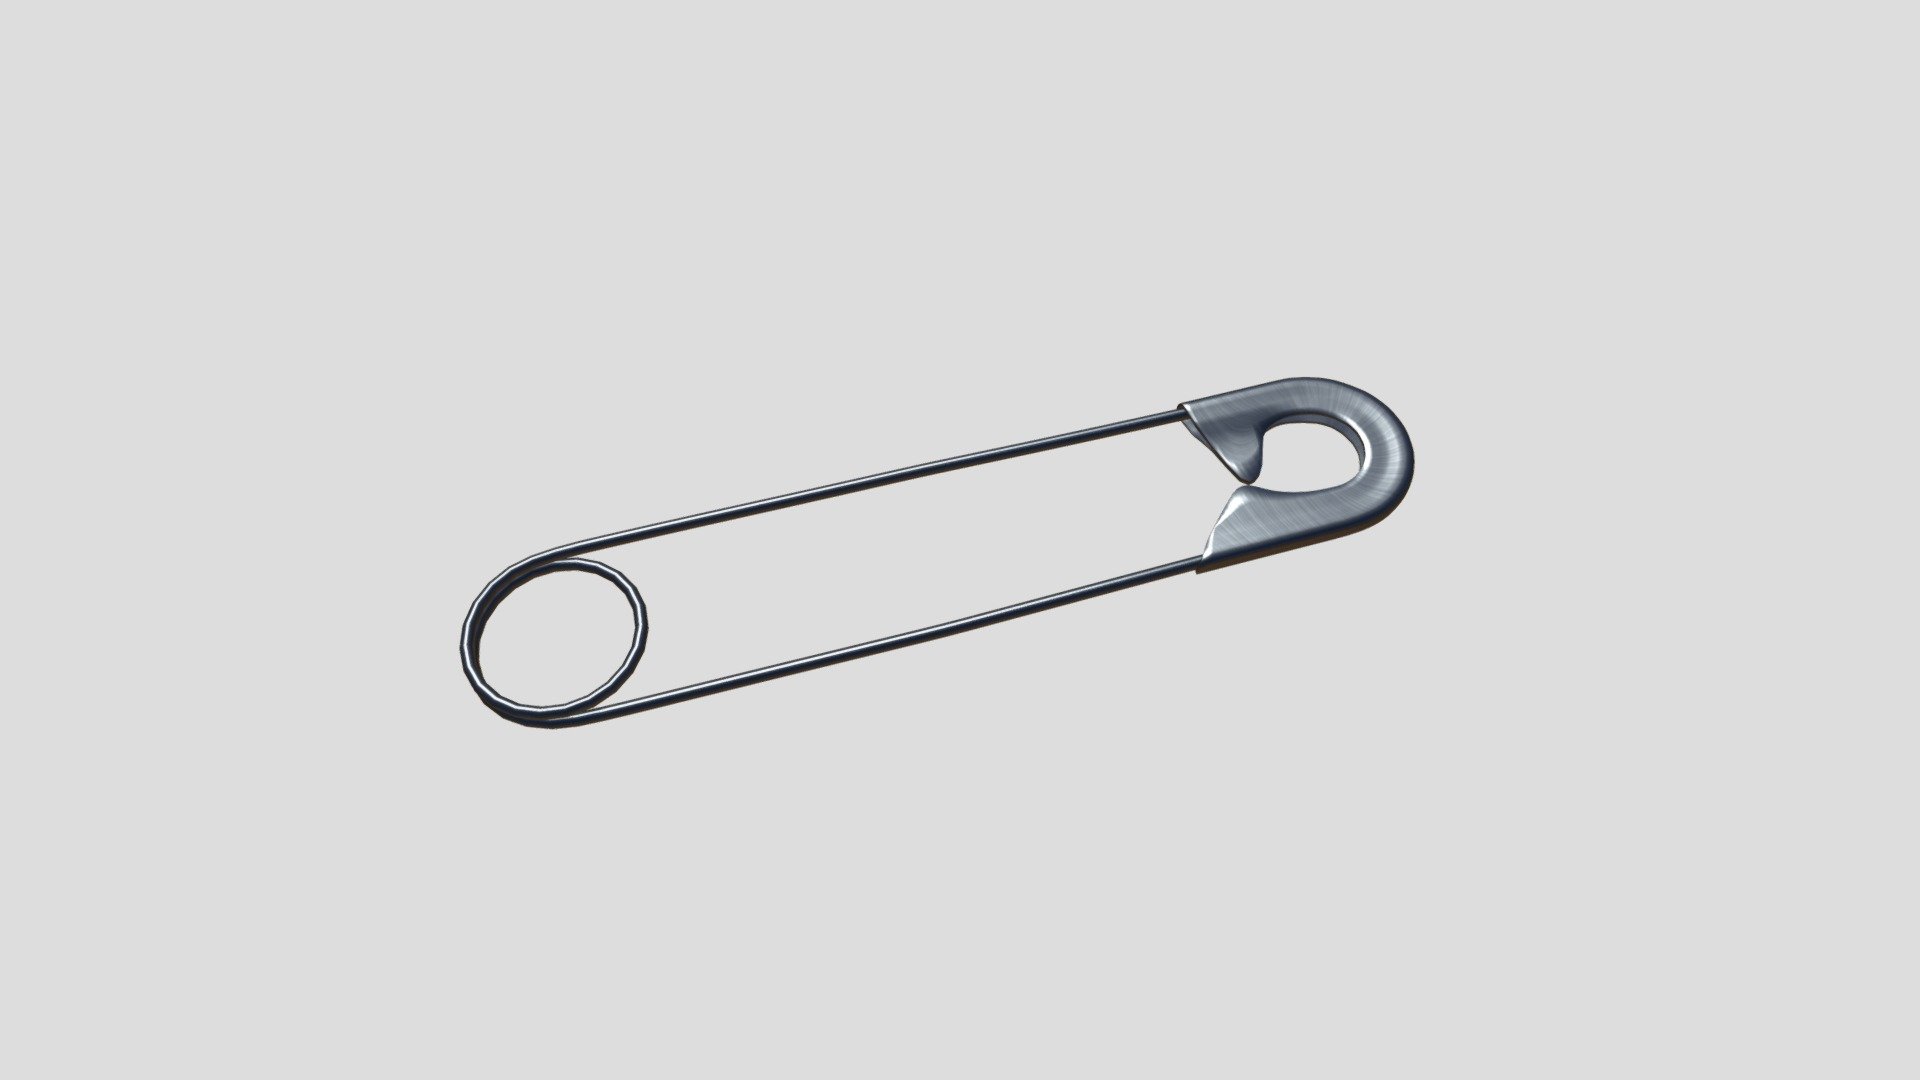 54,534 Safety Pin Images, Stock Photos, 3D objects, & Vectors